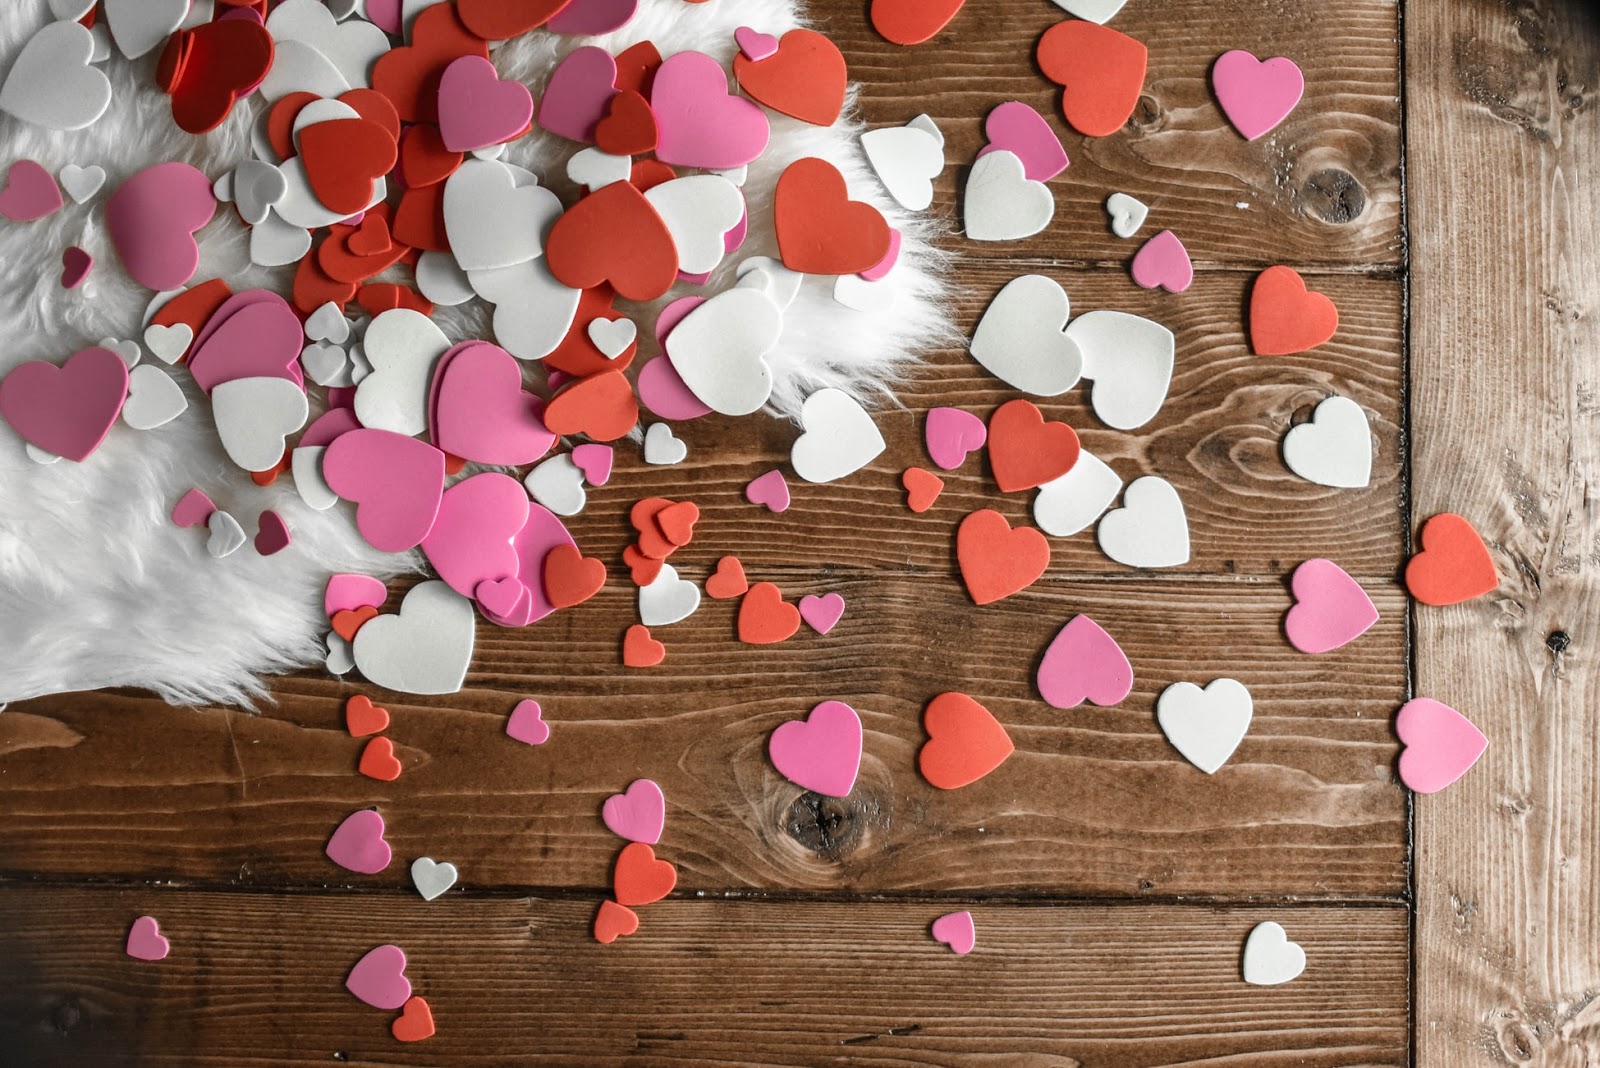 Heart shaped confetti in red white and pink